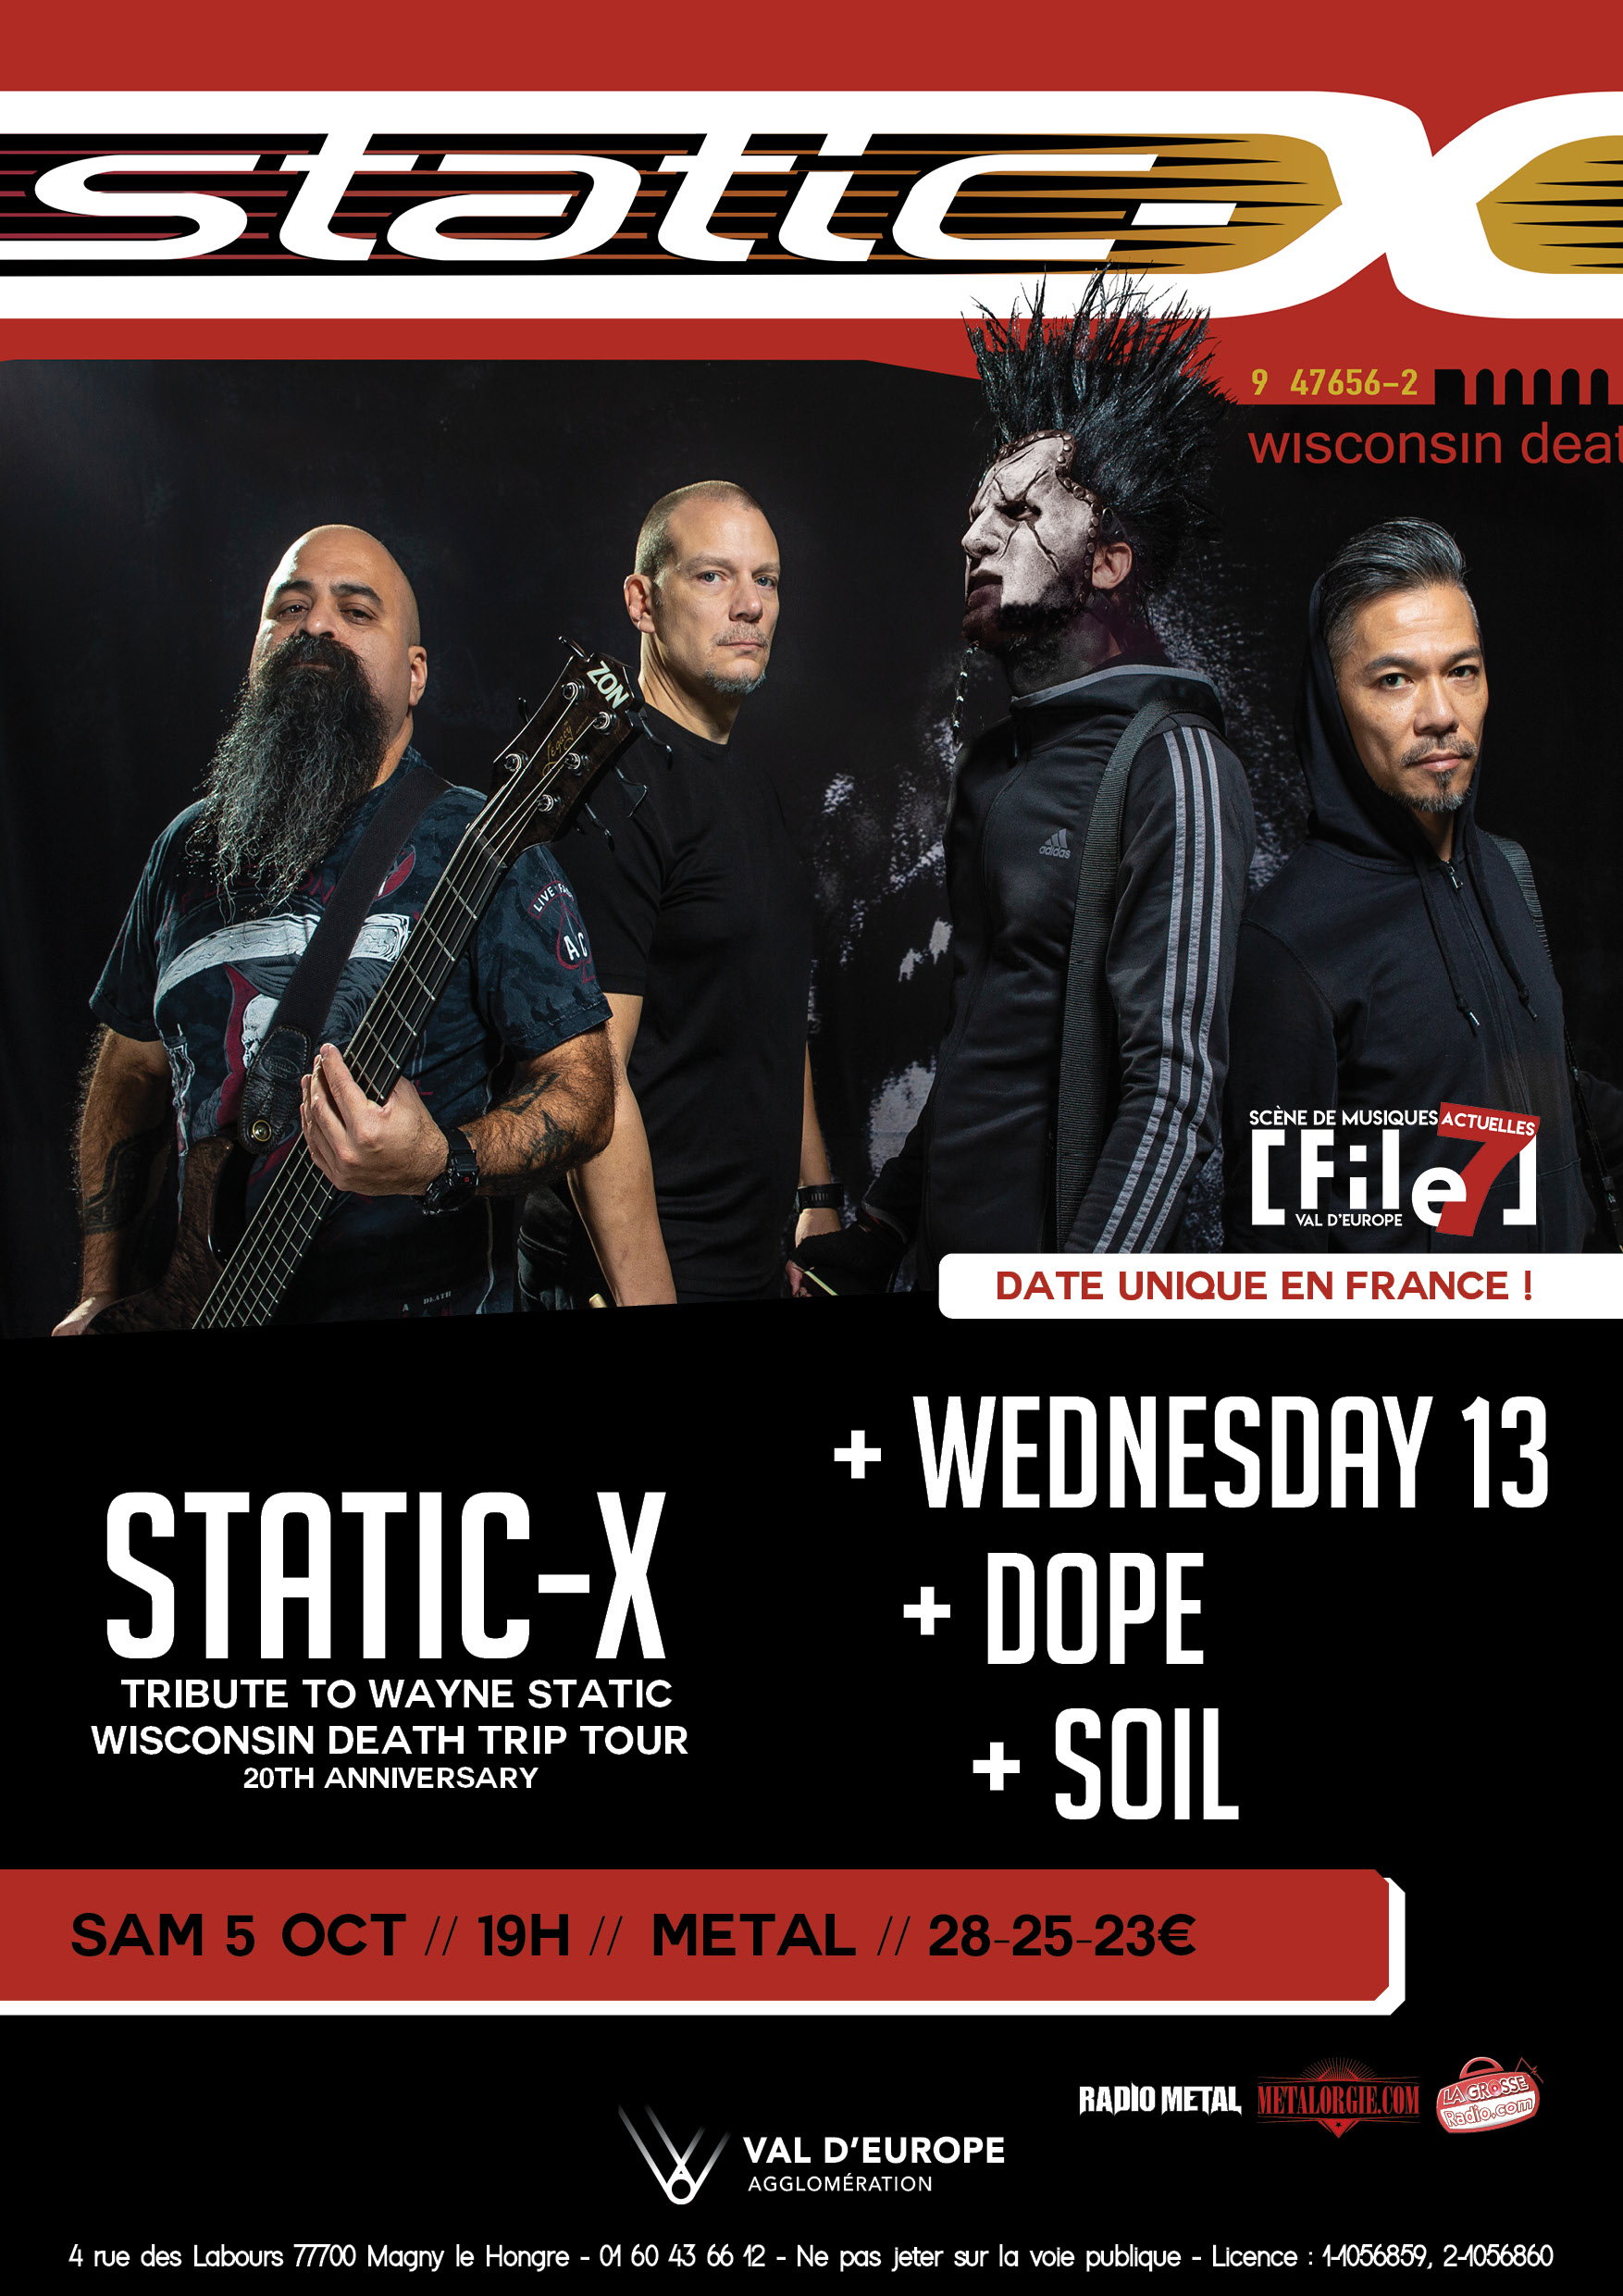 Static-X + Wednesday 13 + Soil + Dope @ File7 (Magny le Hongre), le 5 Octobre 2019